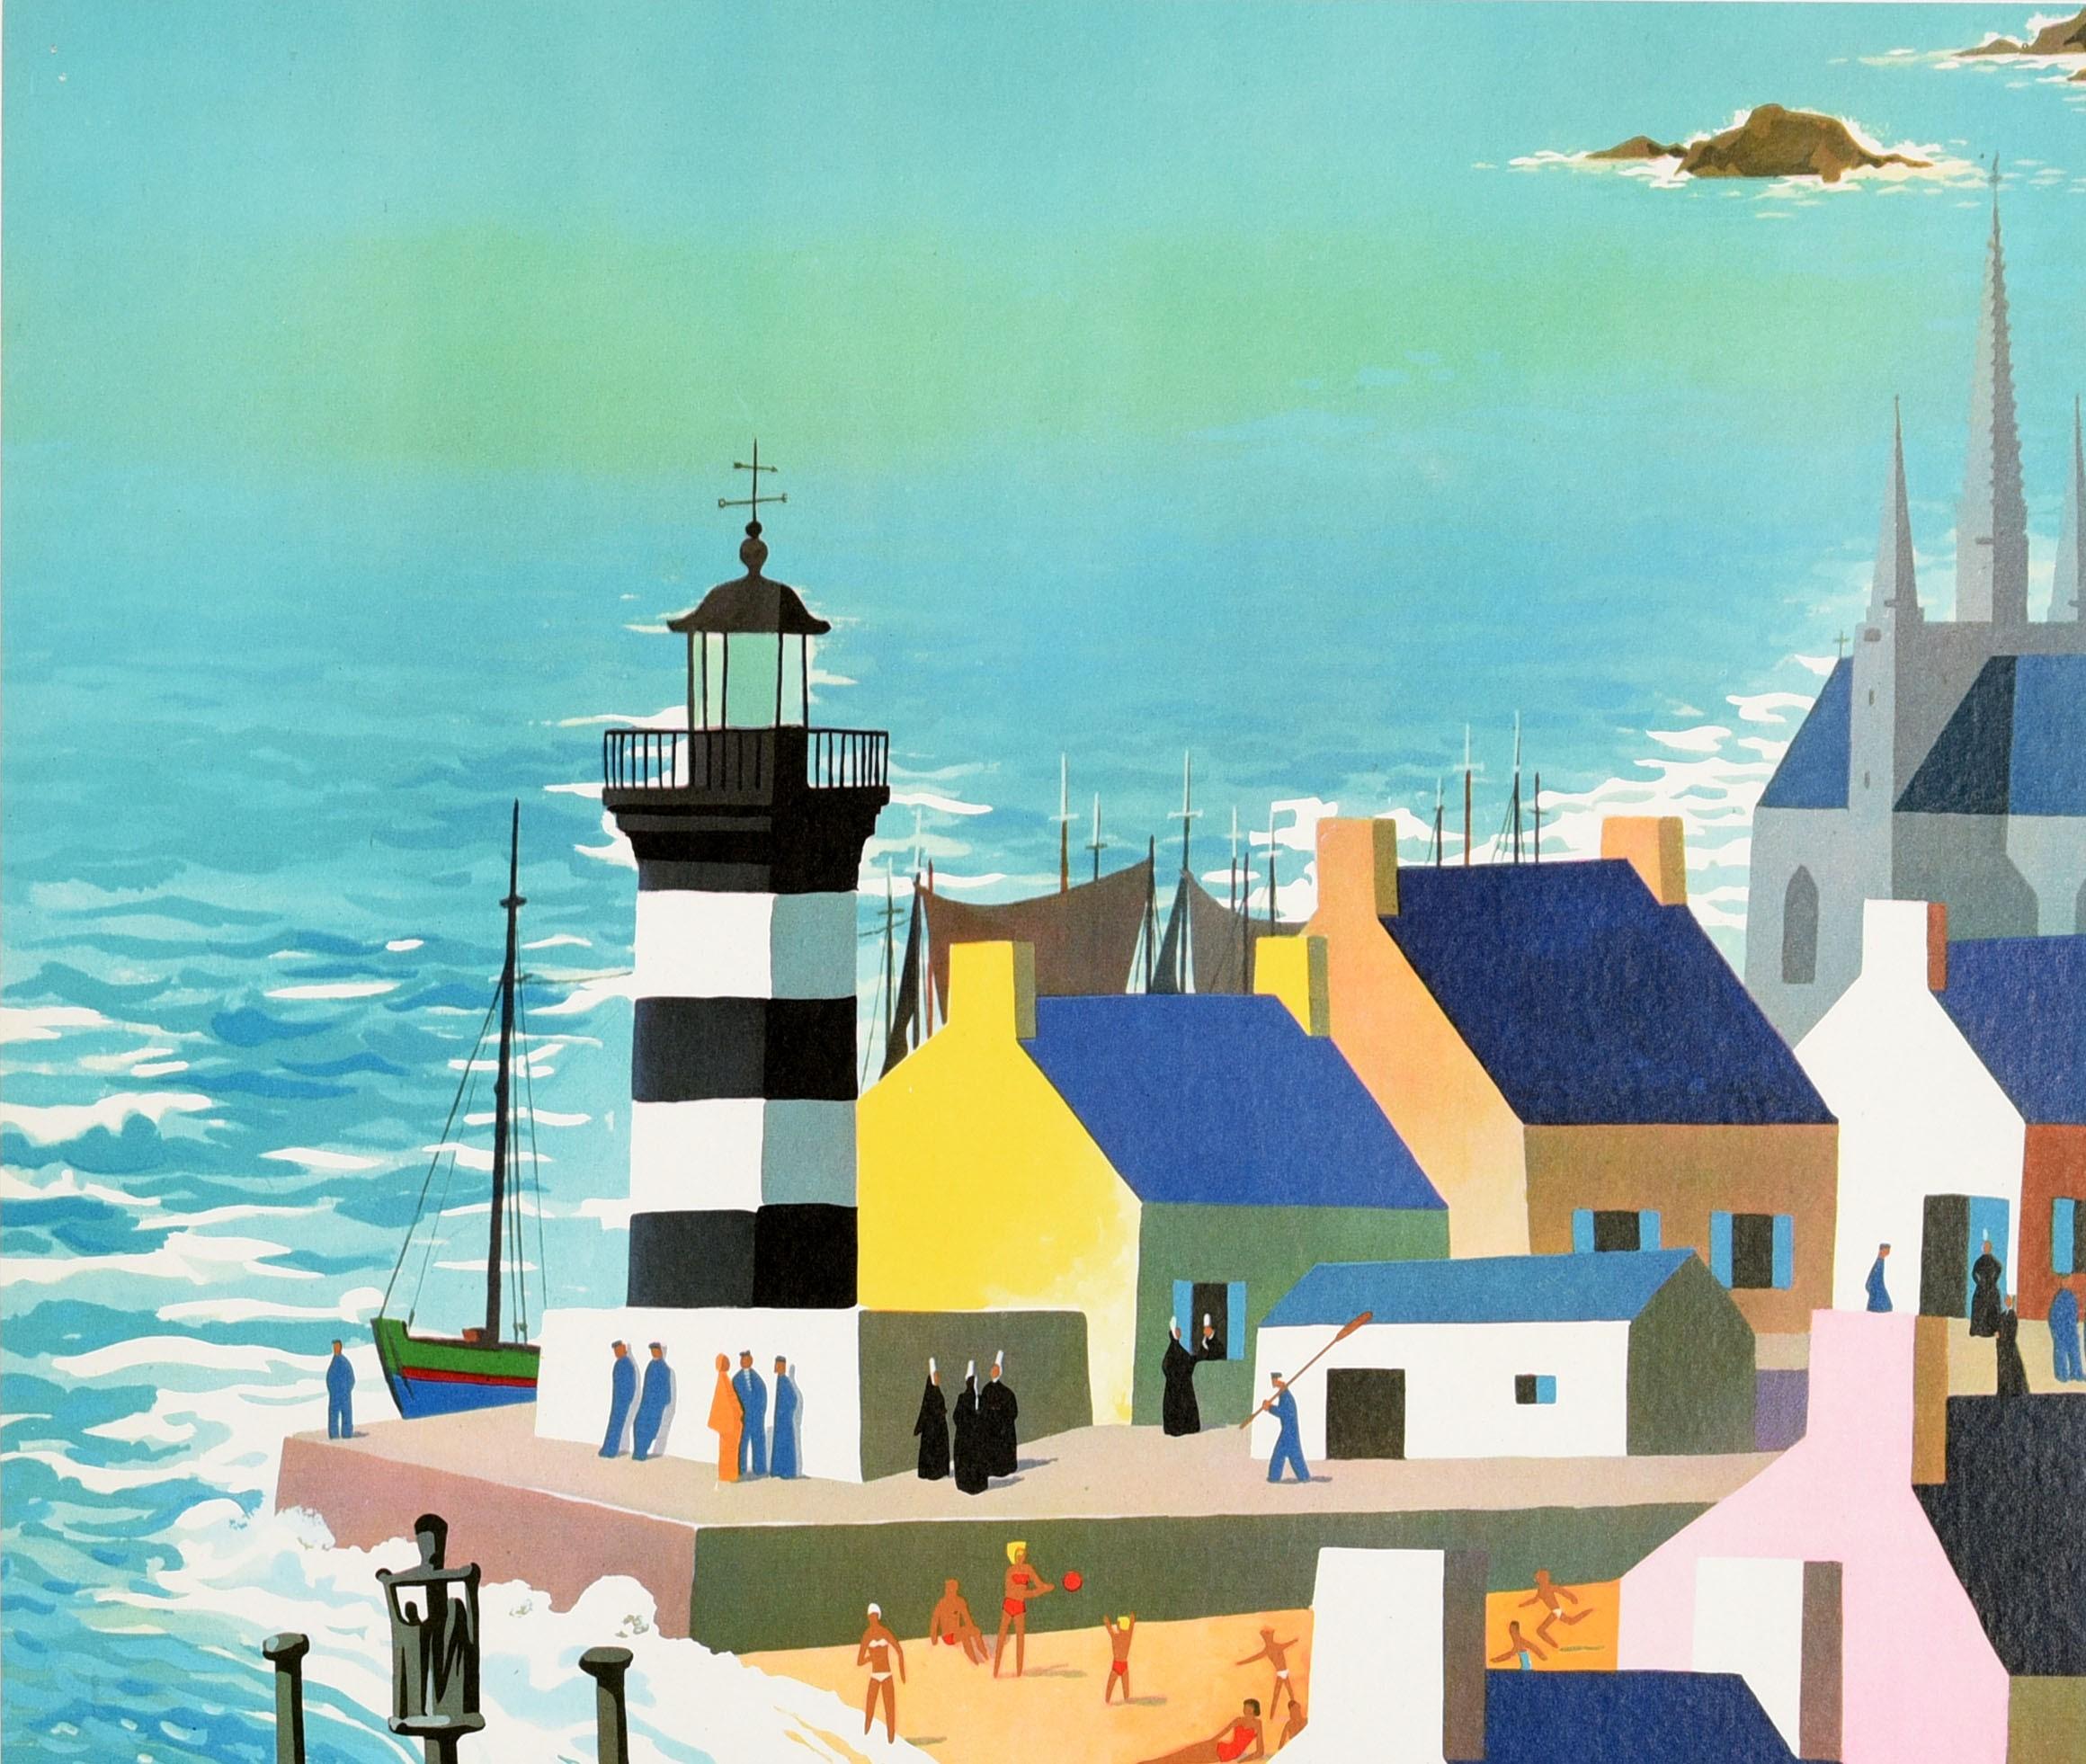 Original vintage railway travel poster - Discover France By Train Brittany French National Railroads - featuring a colourful view by Jean Jacquelin (1905-1989) of the peninsula coast with a lighthouse and boats with rocks at sea, town buildings and